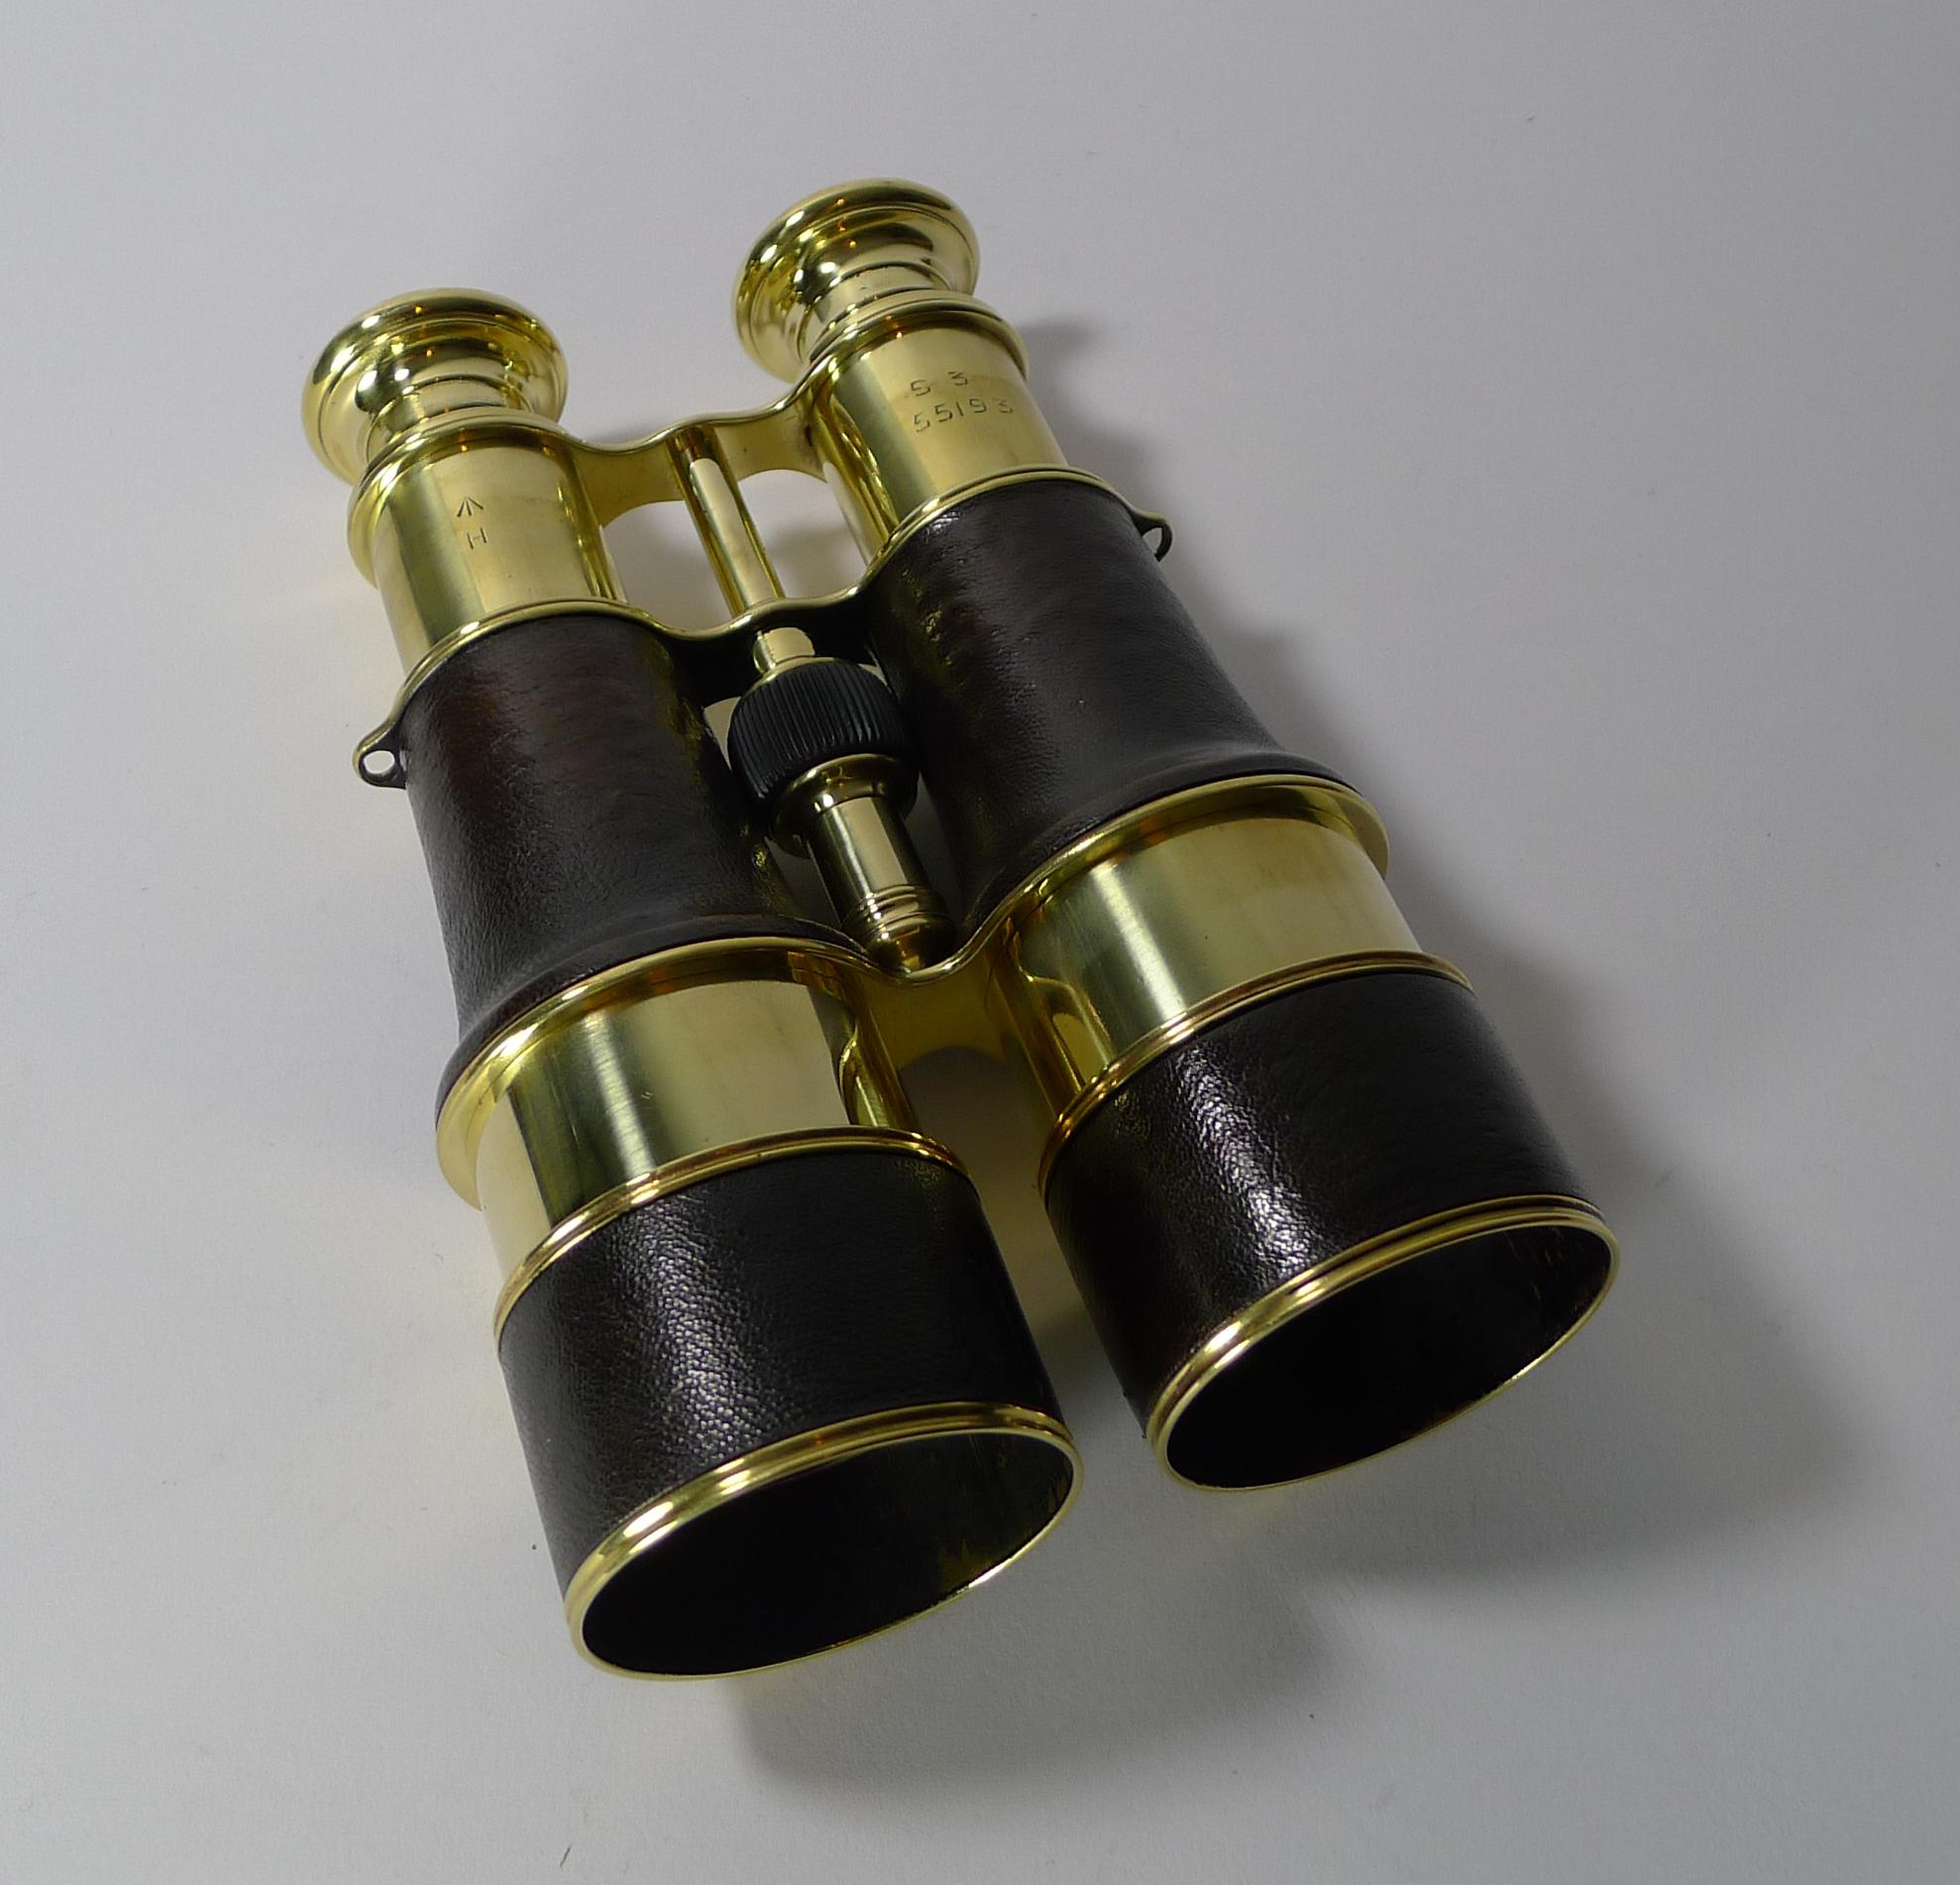 Early 20th Century Pair WW1 Binoculars and Case - British Officer's Issue - 1917 - LeMaire, Paris